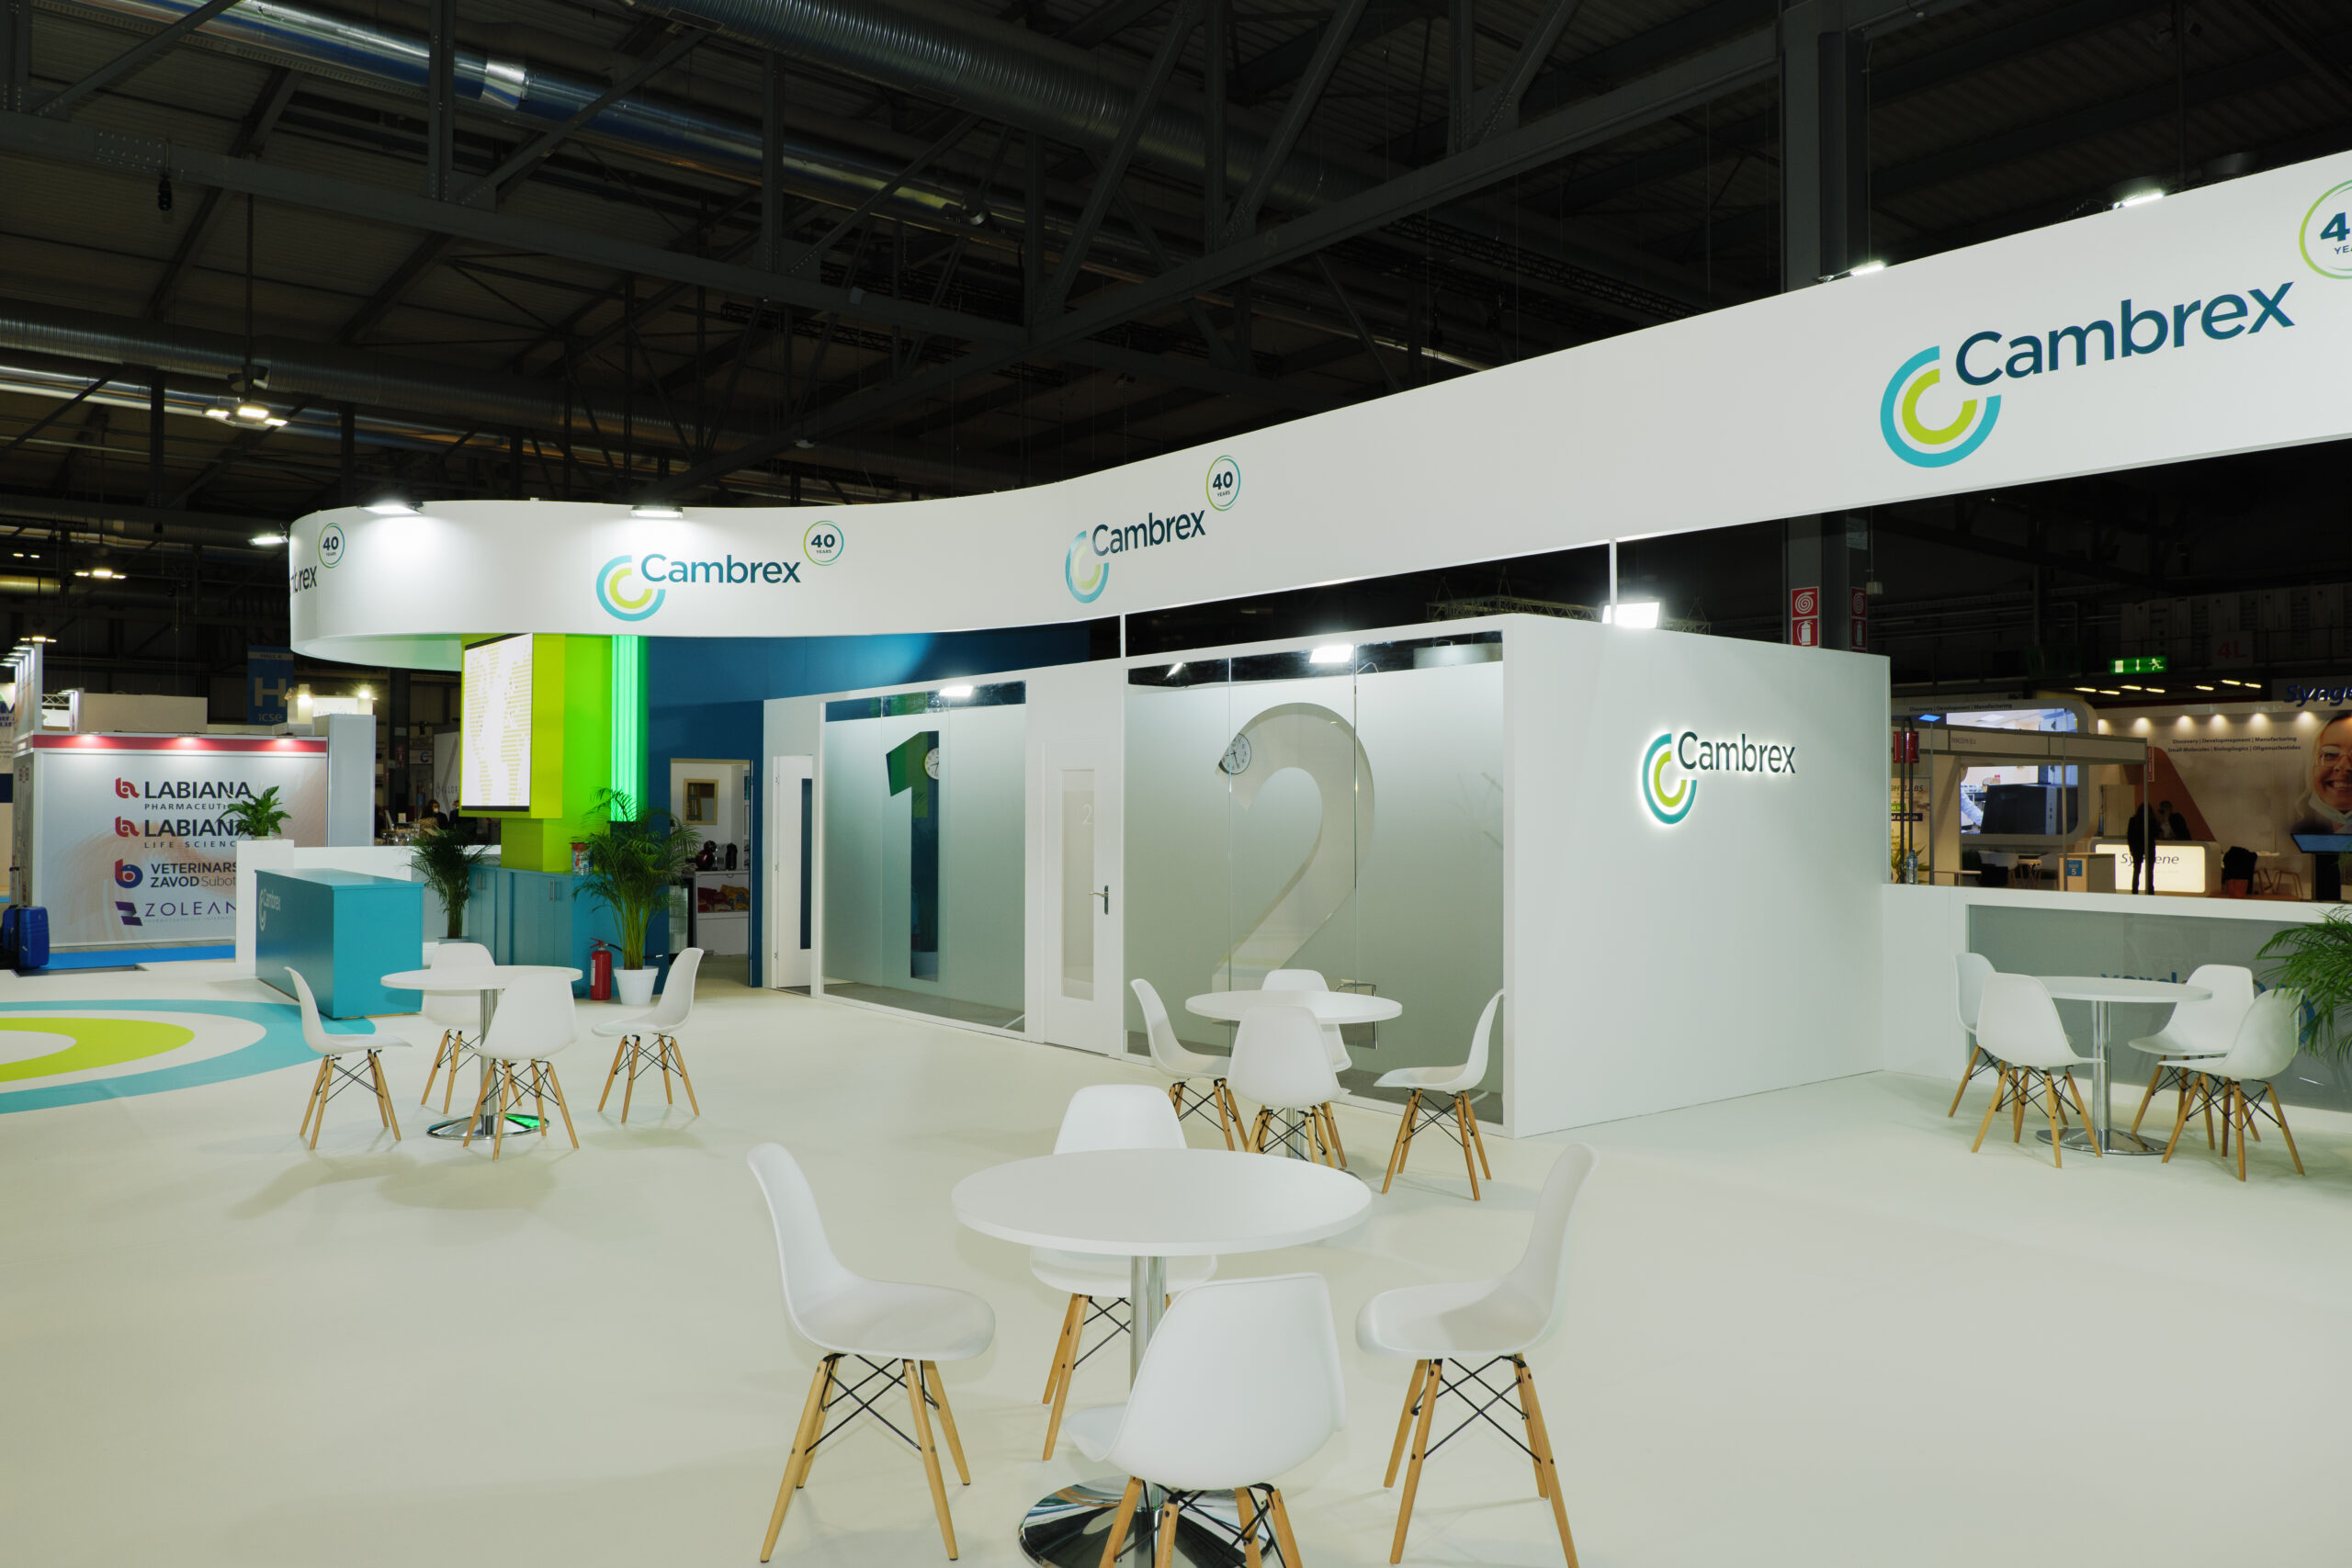 image of Cambrex stand buolt by Aboveline